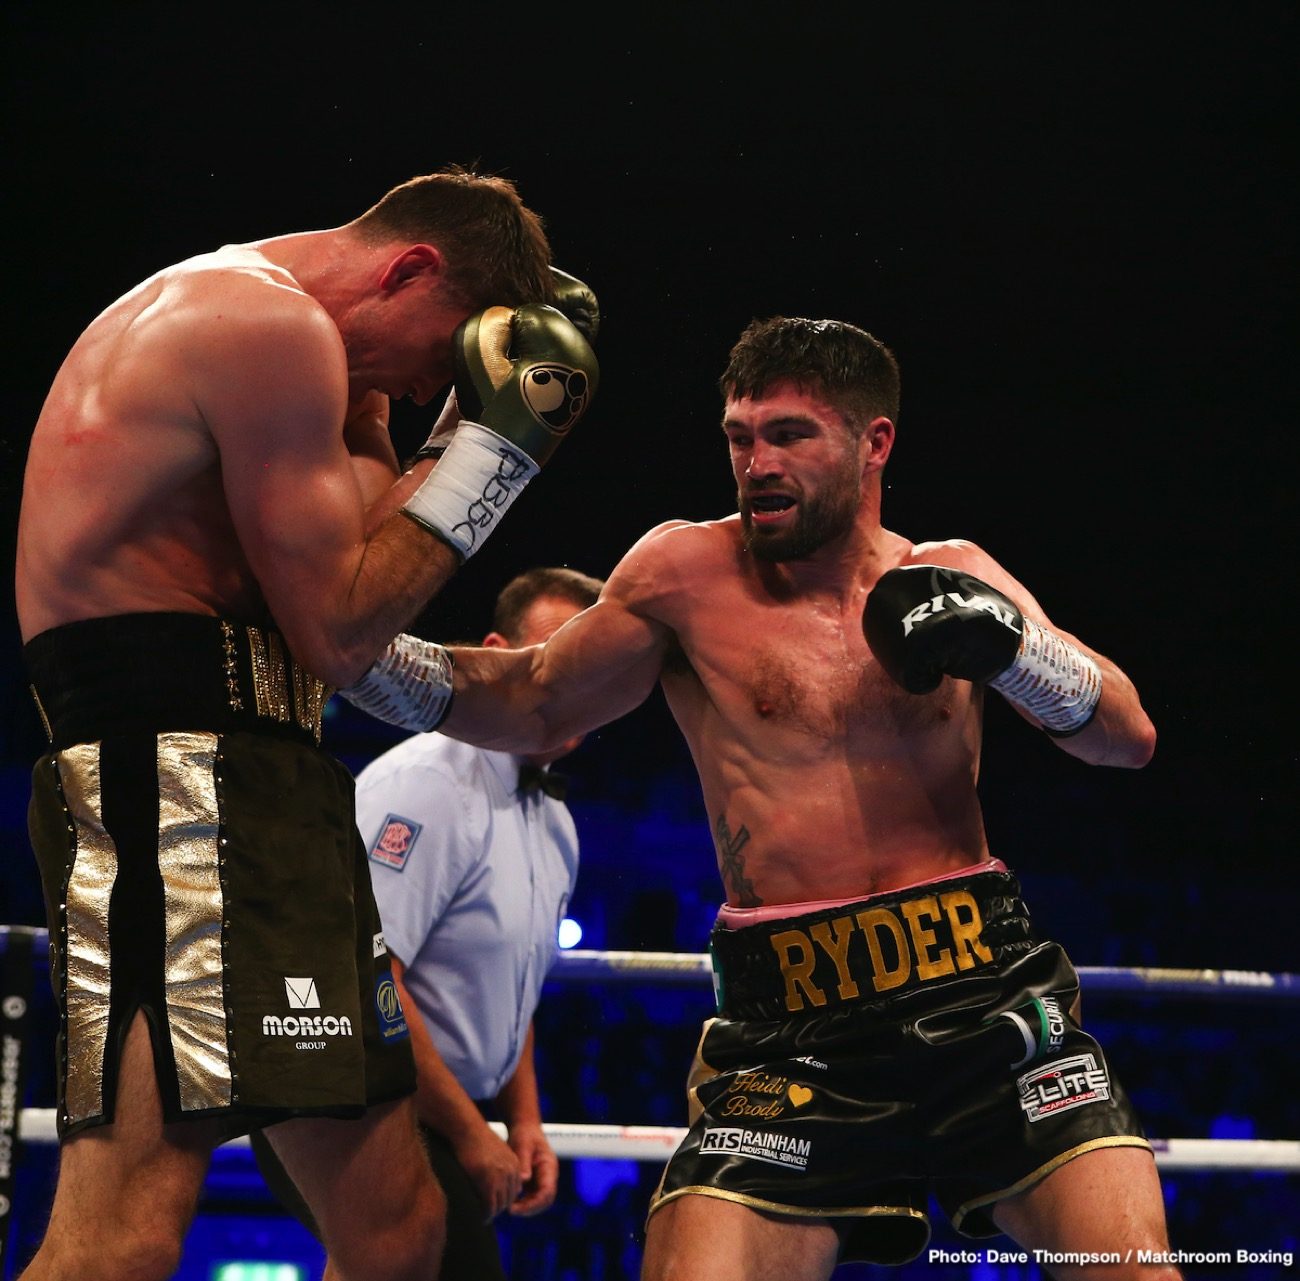 Image: John Ryder is NOT getting rematch - Callum Smith's trainer Joe Gallagher